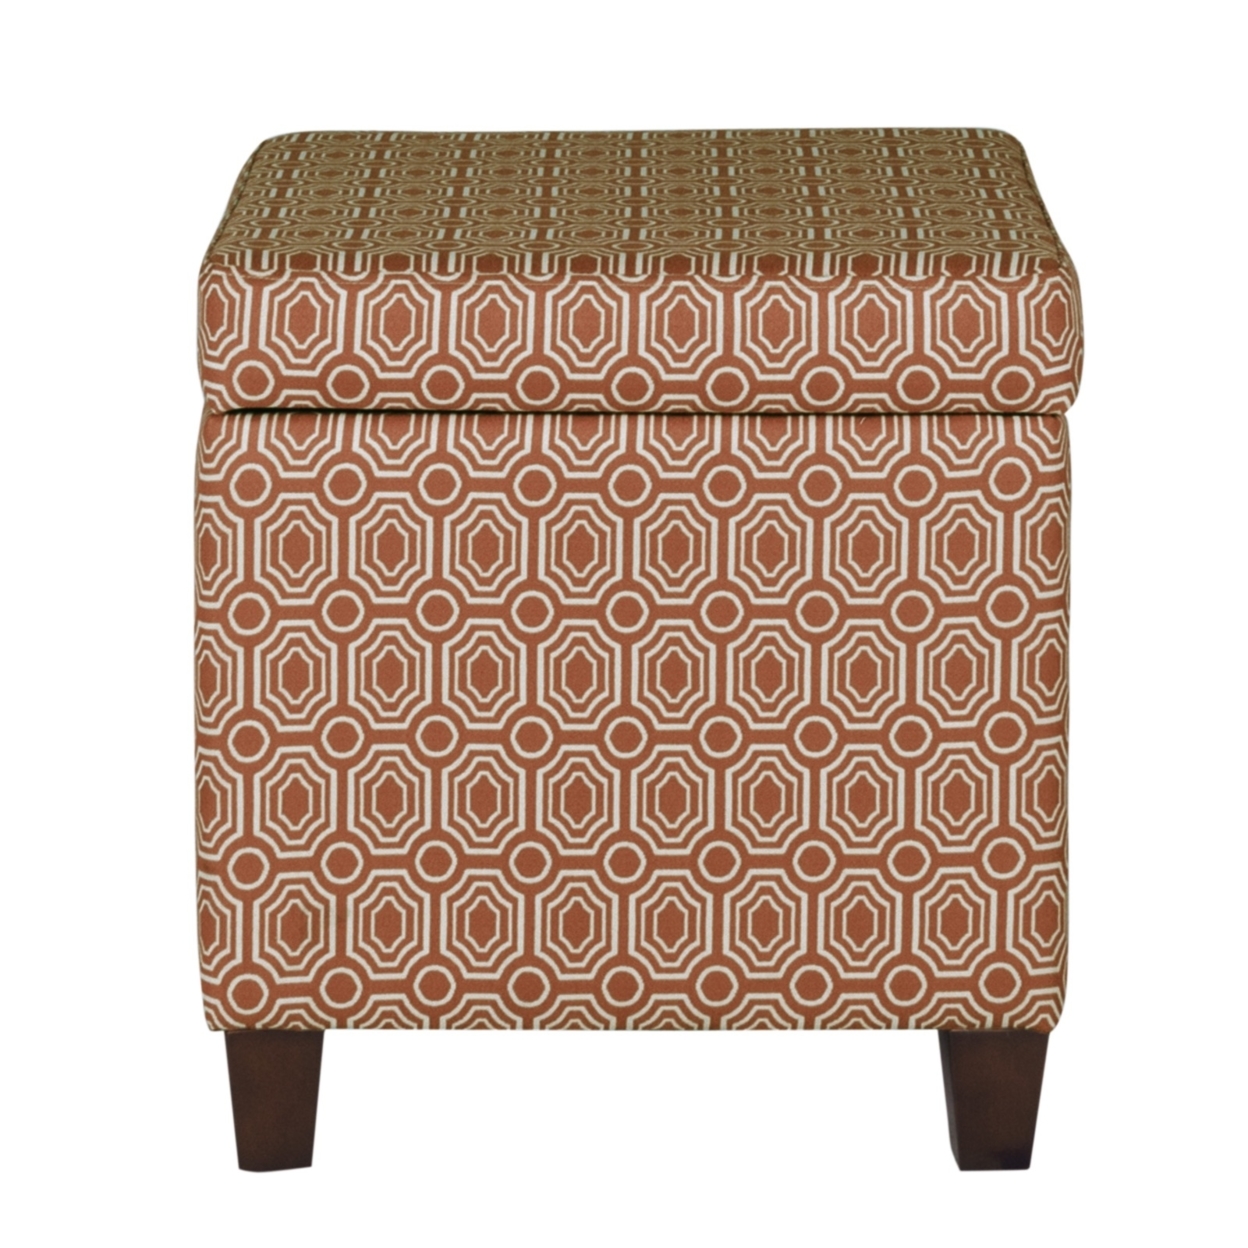 Geometric Patterned Square Wooden Ottoman With Lift Off Lid Storage, Orange And Cream- Saltoro Sherpi